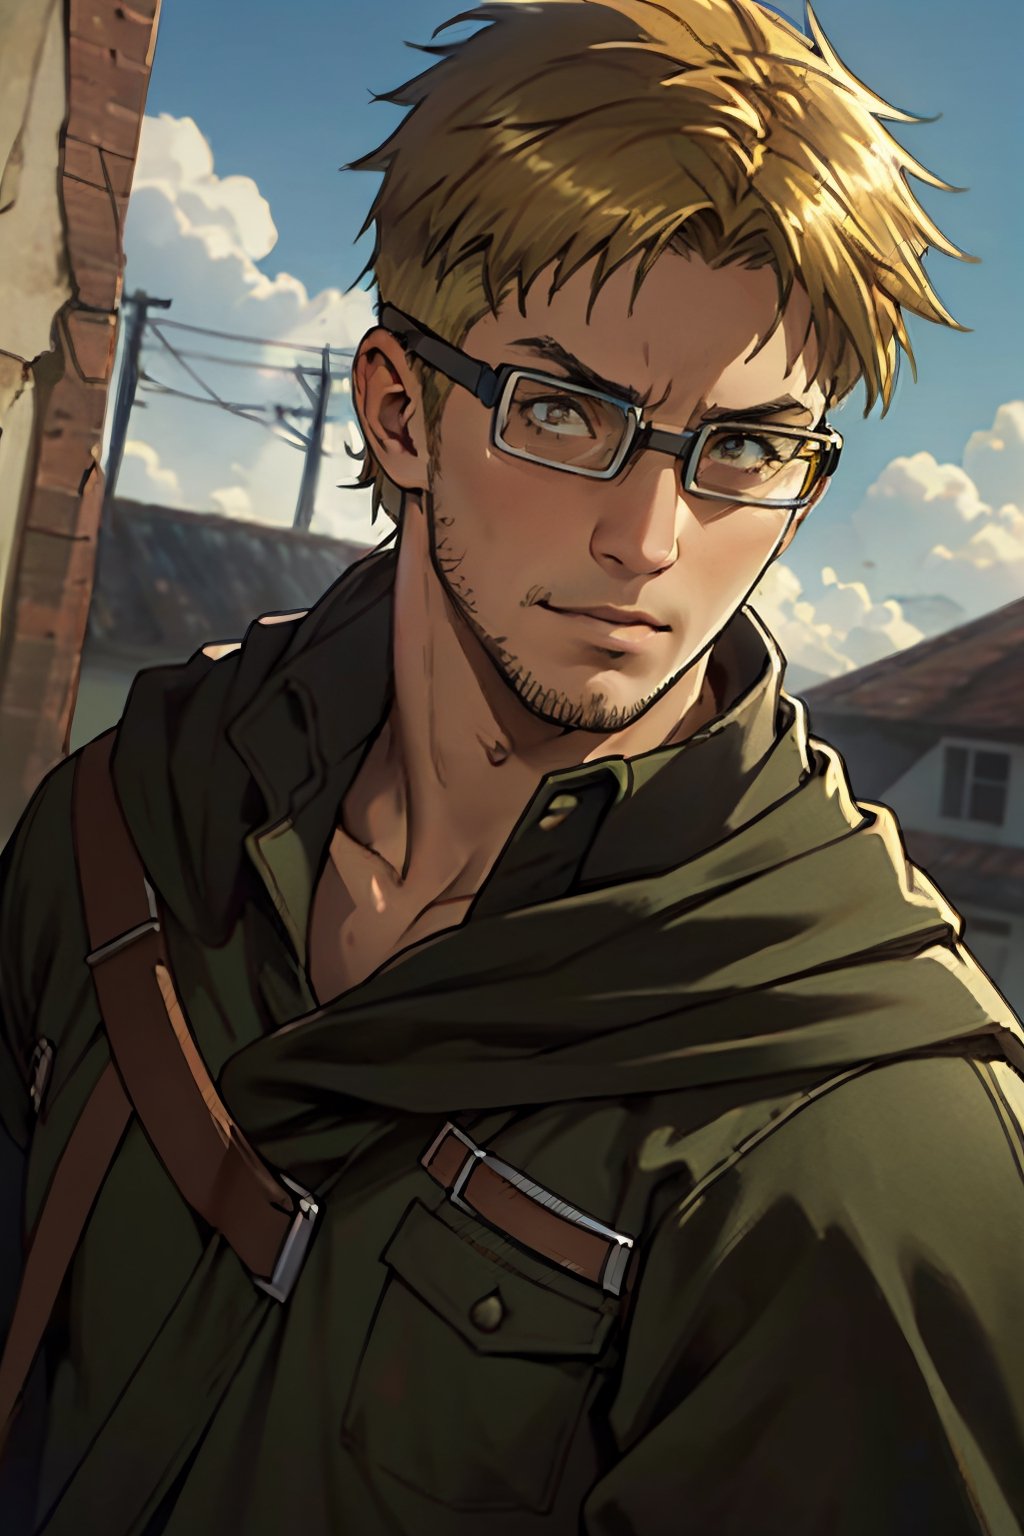 Abel, solo, Attack on Titan, uniform of the Scout Regiment, green cloak, blond hair, brown eyes, goggles, thick-rimmed glasses with bands around head, light stubble on chin and cheekbones, (shaved philtrum, hairless philtrum:1.3), fit body, handsome, charming, alluring, intense gaze, gentle expression, soft expression, (standing), (upper body in frame), simple background, green plains, cloudy blue sky, perfect light, only1 image, perfect anatomy, perfect proportions, perfect perspective, 8k, HQ, (best quality:1.5, hyperrealistic:1.5, photorealistic:1.4, madly detailed CG unity 8k wallpaper:1.5, masterpiece:1.3, madly detailed photo:1.2), (hyper-realistic lifelike texture:1.4, realistic eyes:1.2), picture-perfect face, perfect eye pupil, detailed eyes, realistic, HD, UHD, (front view:1.2), portrait, looking outside frame,(MkmCut)